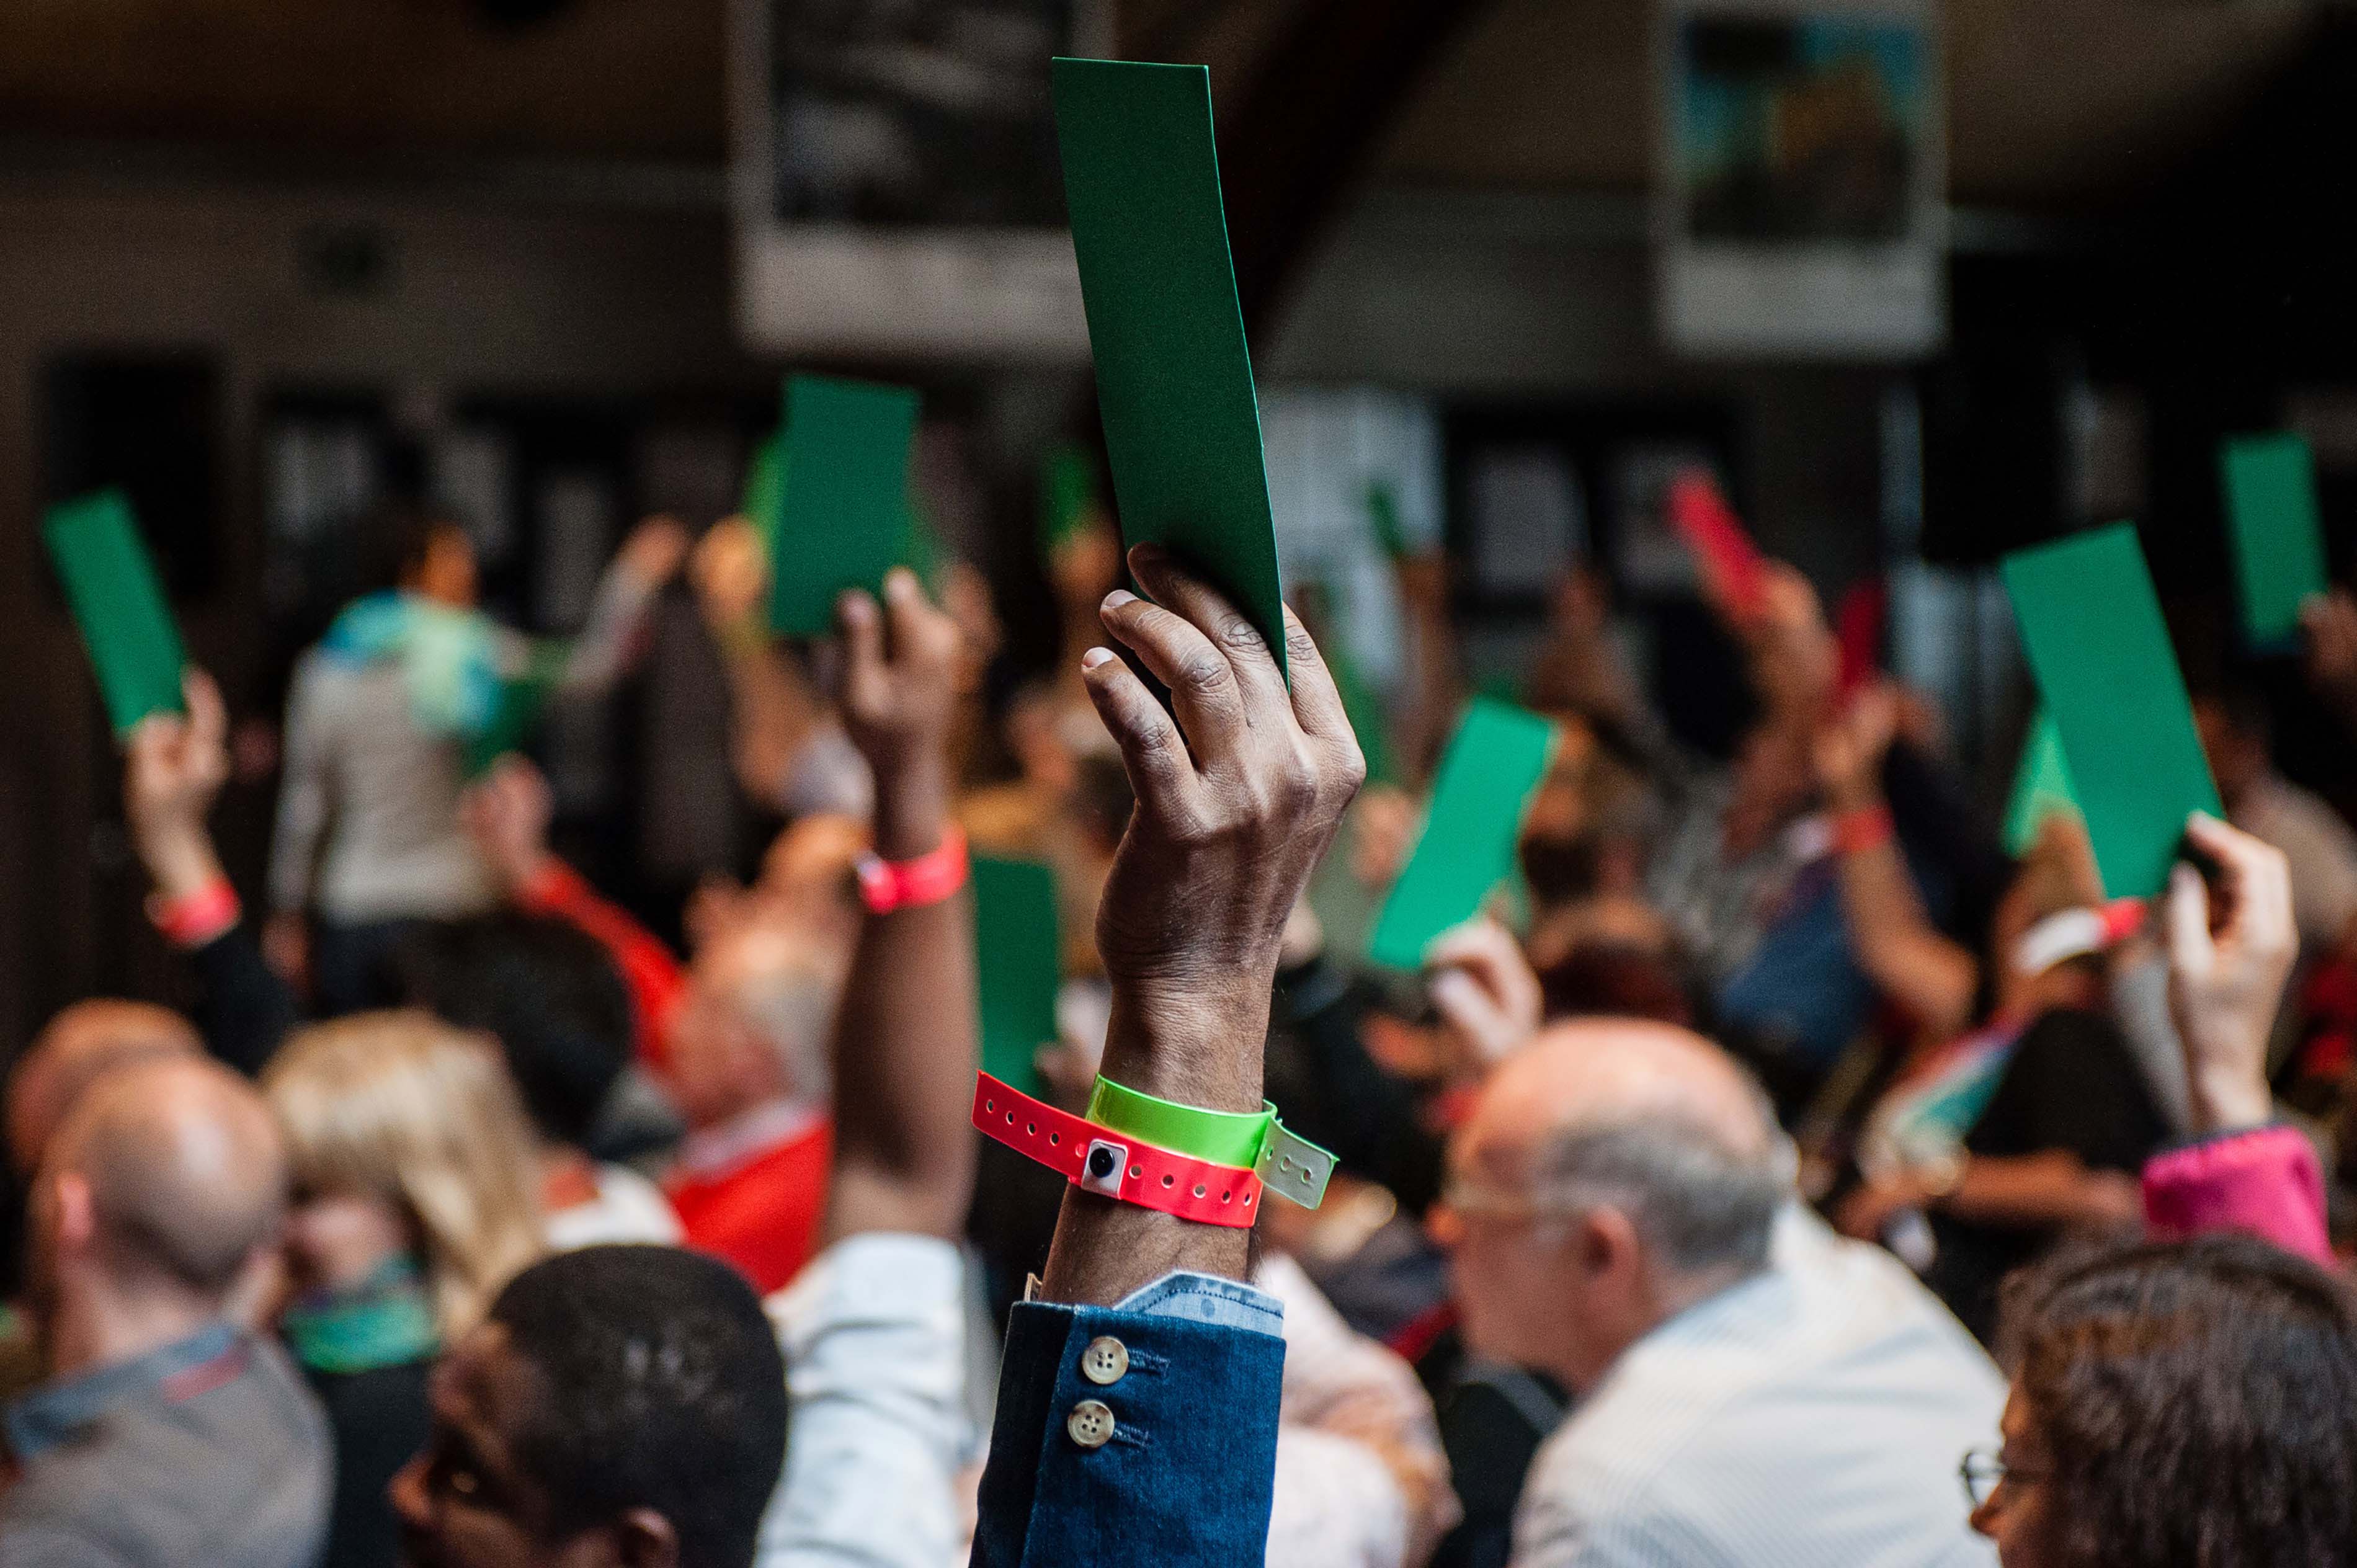 The International General Assembly (IGA), June 2013, Brussels. The IGA is the highest governance body within MSF. It safeguards our medical humanitarian mission and provides general and strategic orientations across the movement. The assembly is composed of two representatives from each MSF association and the MSF International President. Each representative has a single independent vote.